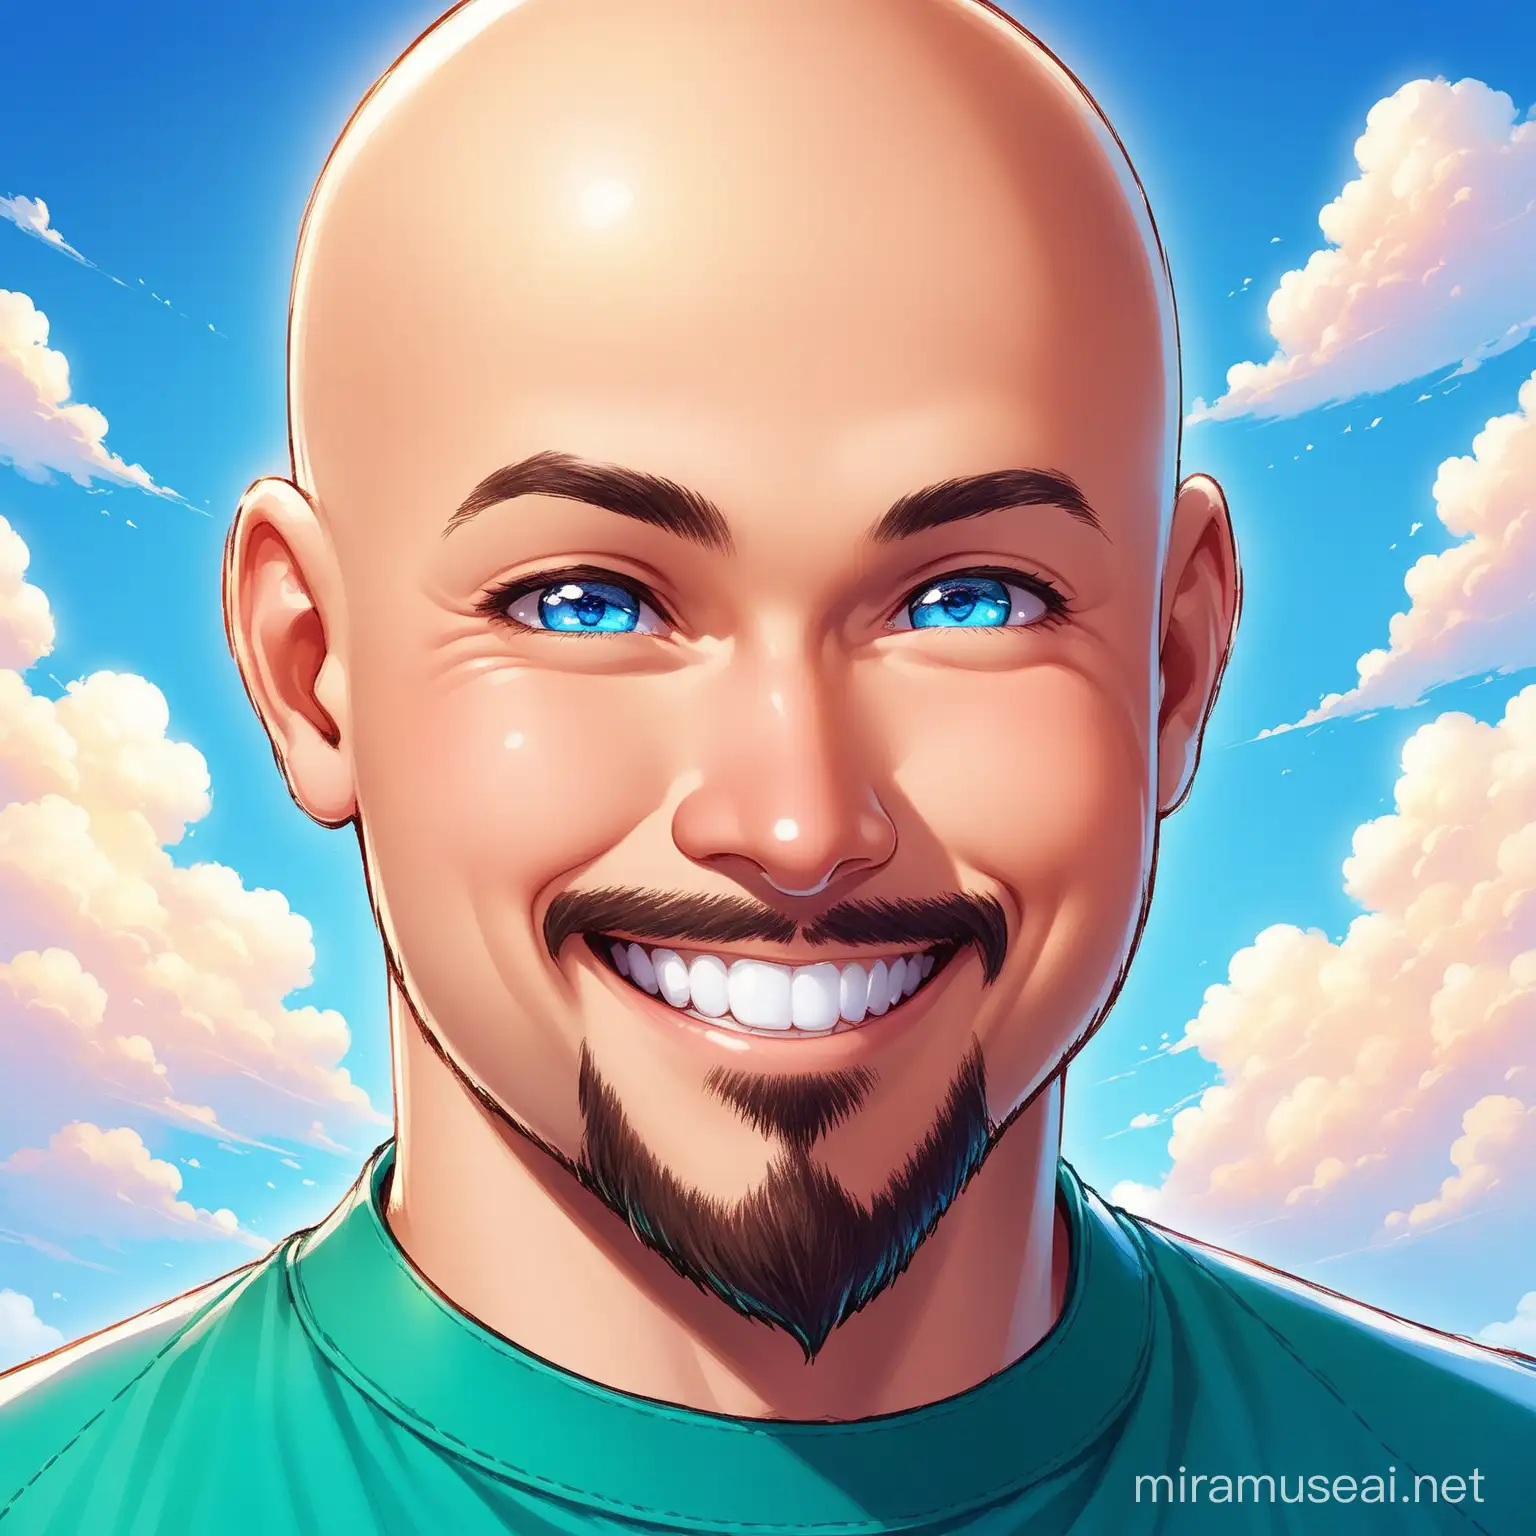 Bald Man with Blue Eyes Smiling Amidst Clouds